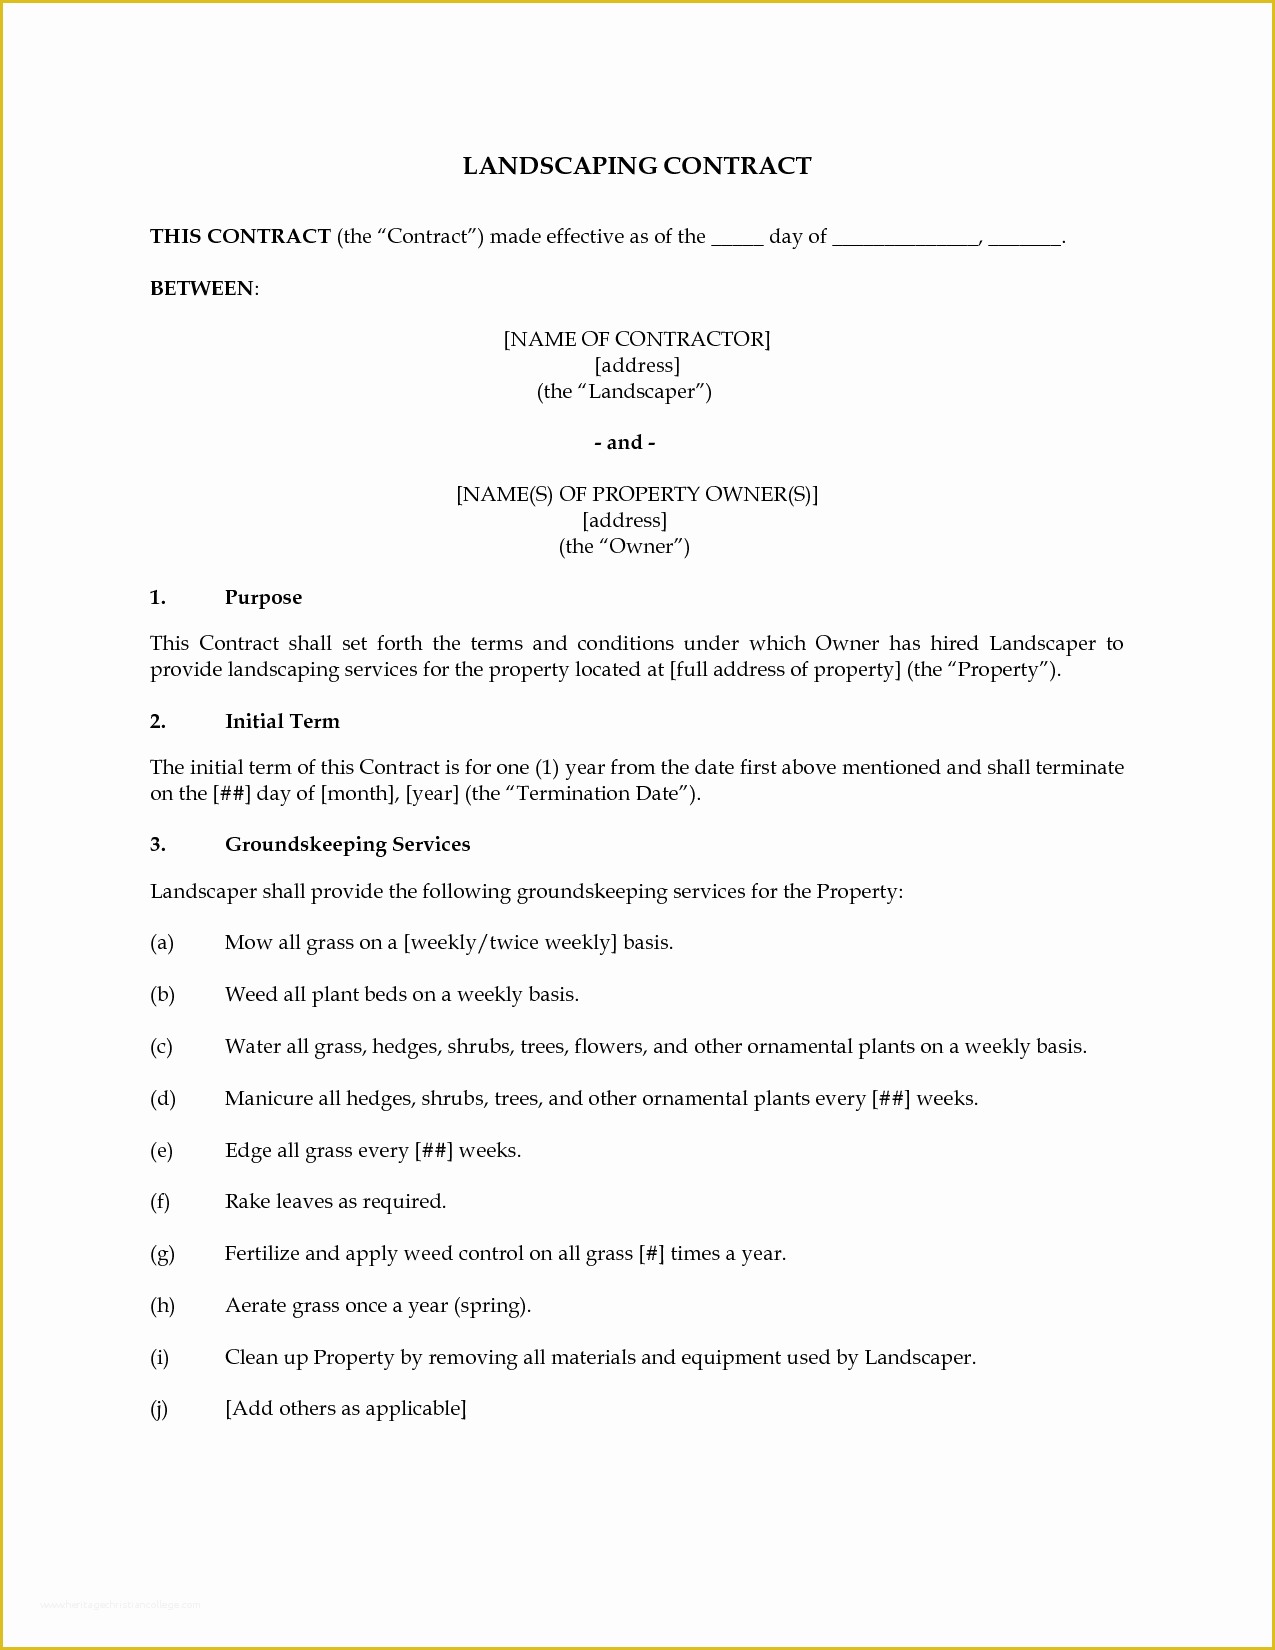 Lawn Care Contract Template Free Of Easy and Fast Lawn Care Landscaping Contract Yahoo